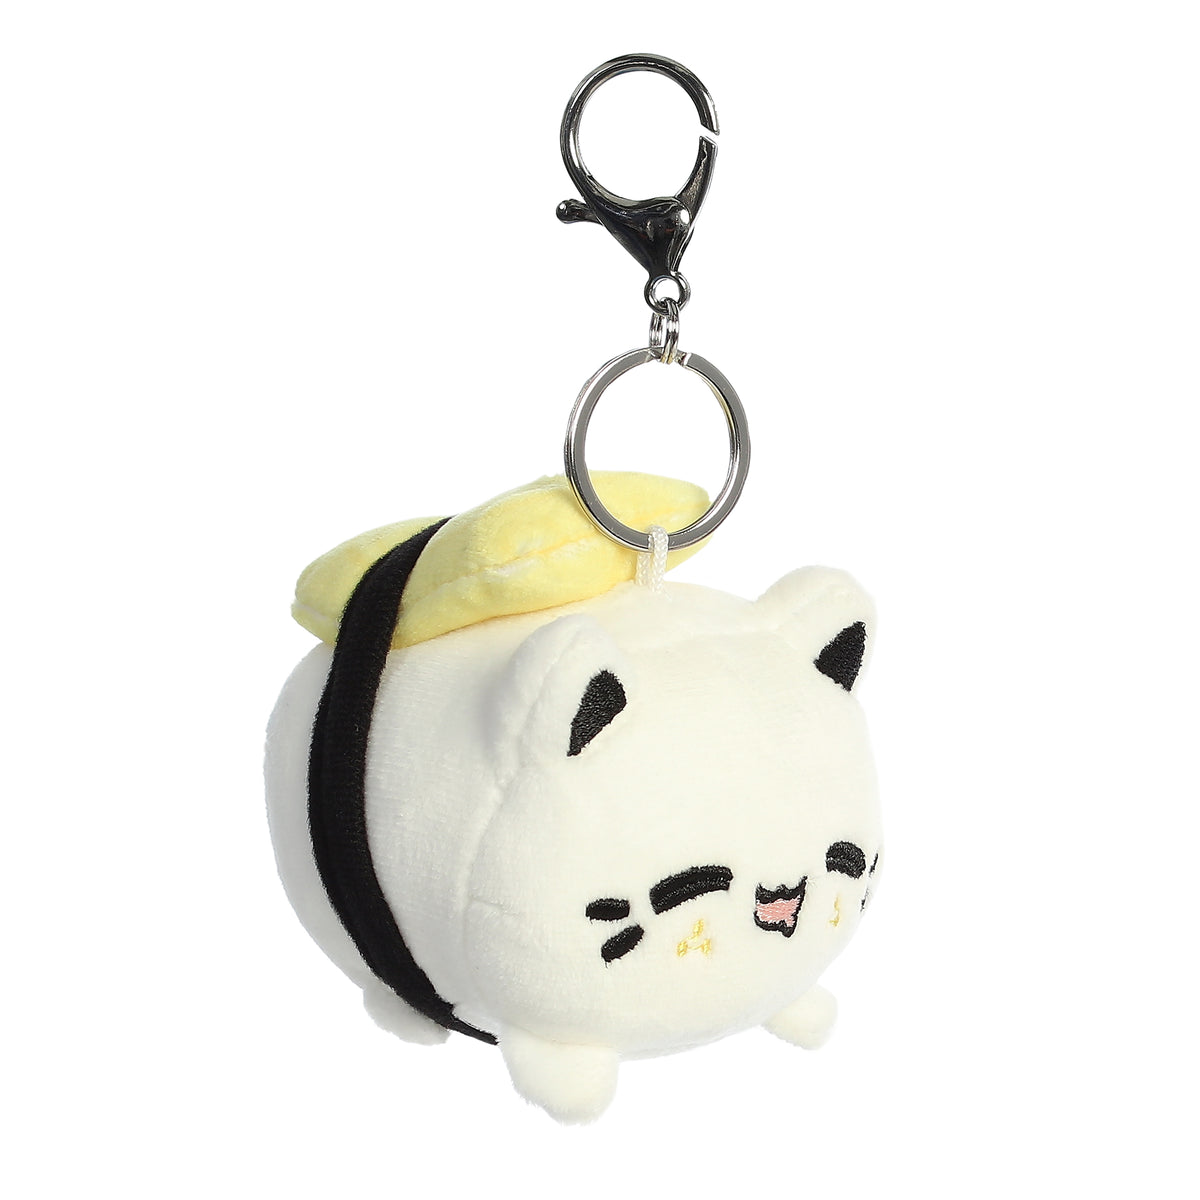 A white Meowchi cat clip-on made to resemble a sushi roll with a yellow slice of fish and a smiling animated expression.